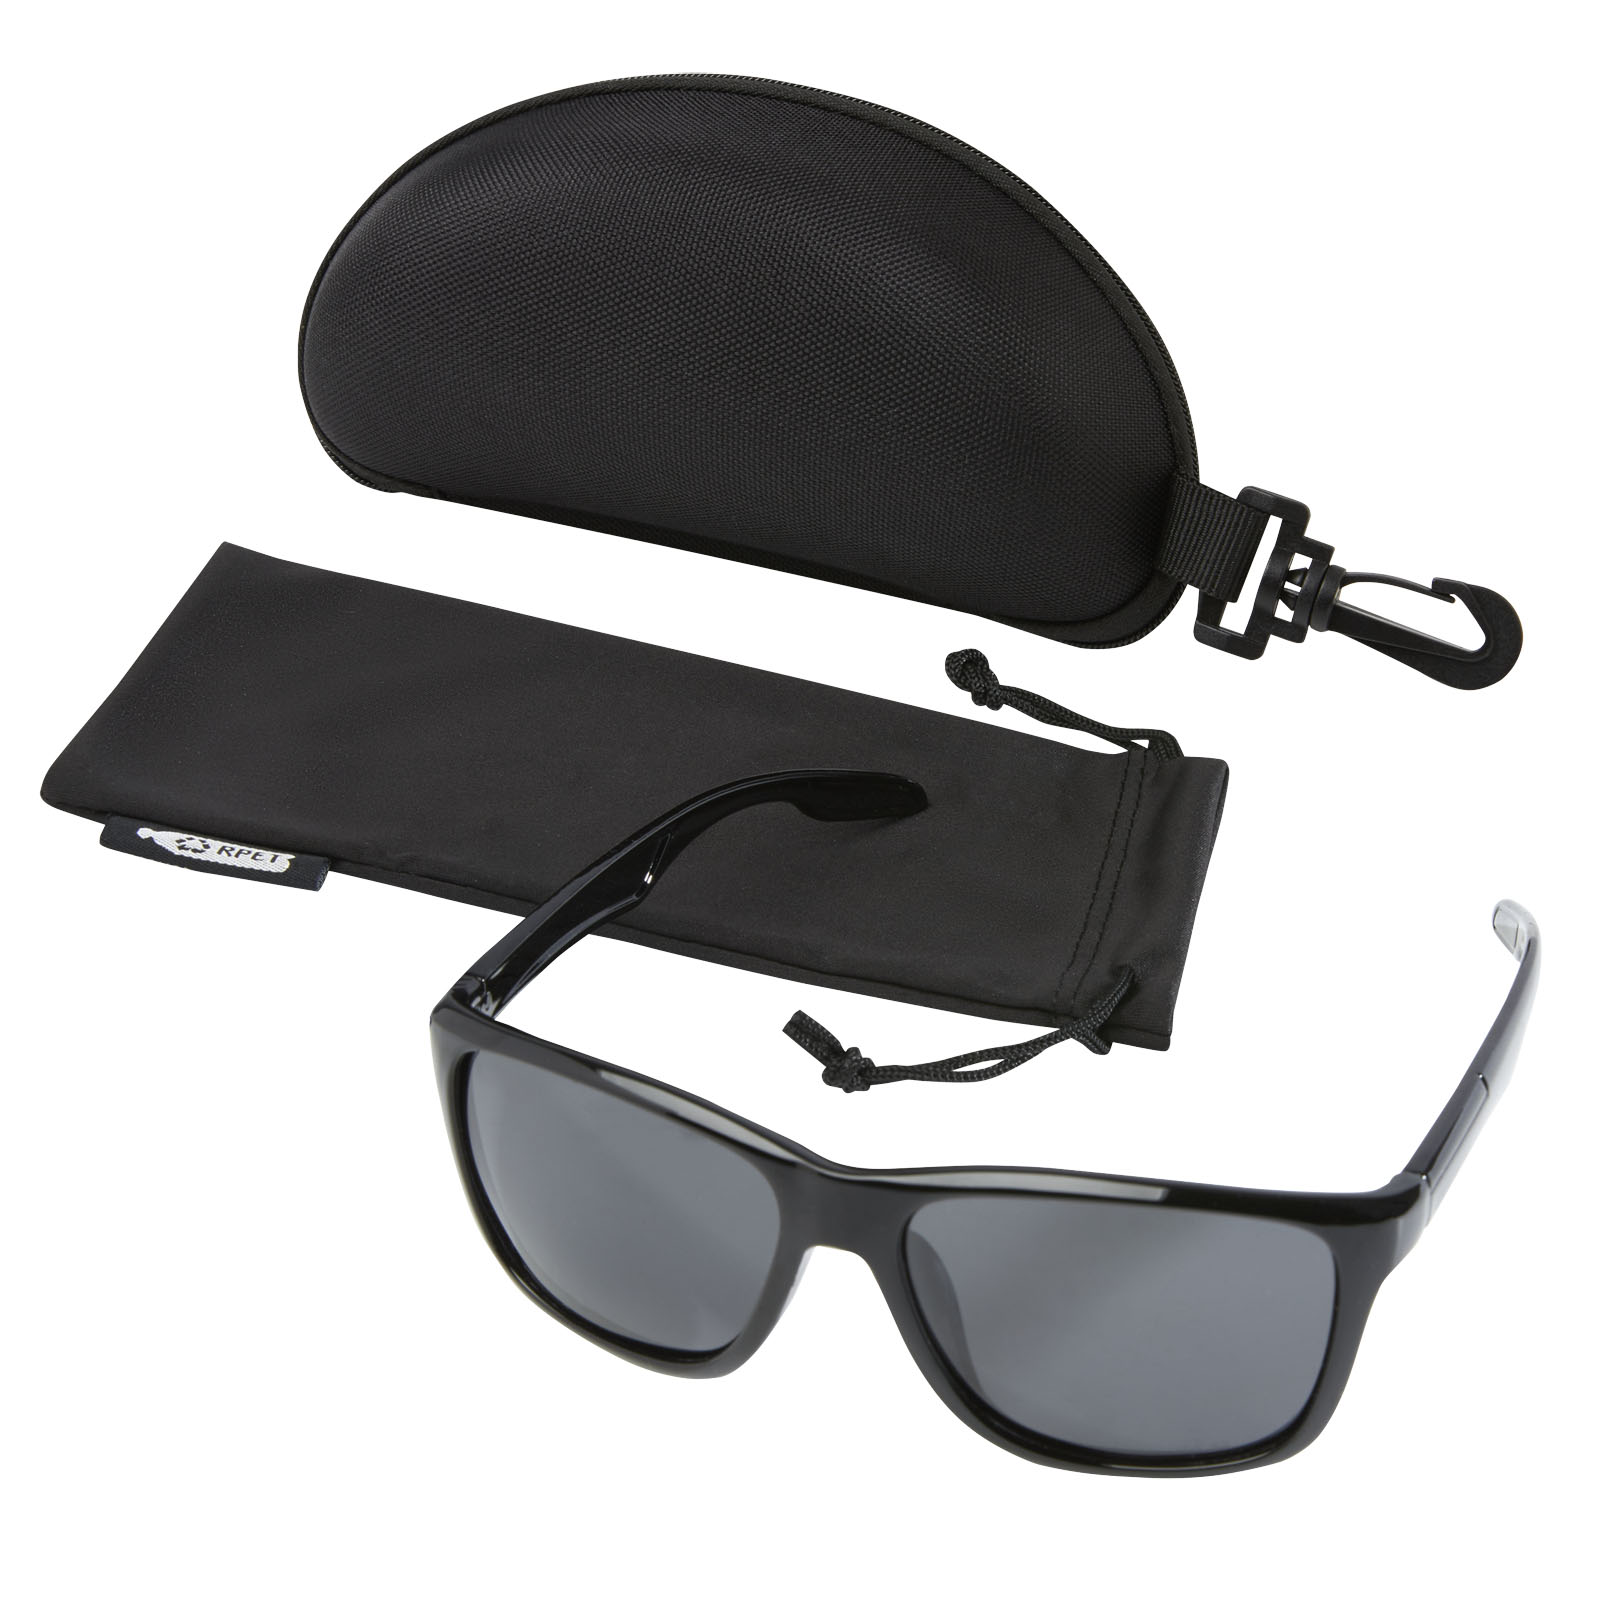 Advertising Sunglasses - Eiger polarized sunglasses in recycled PET casing - 4